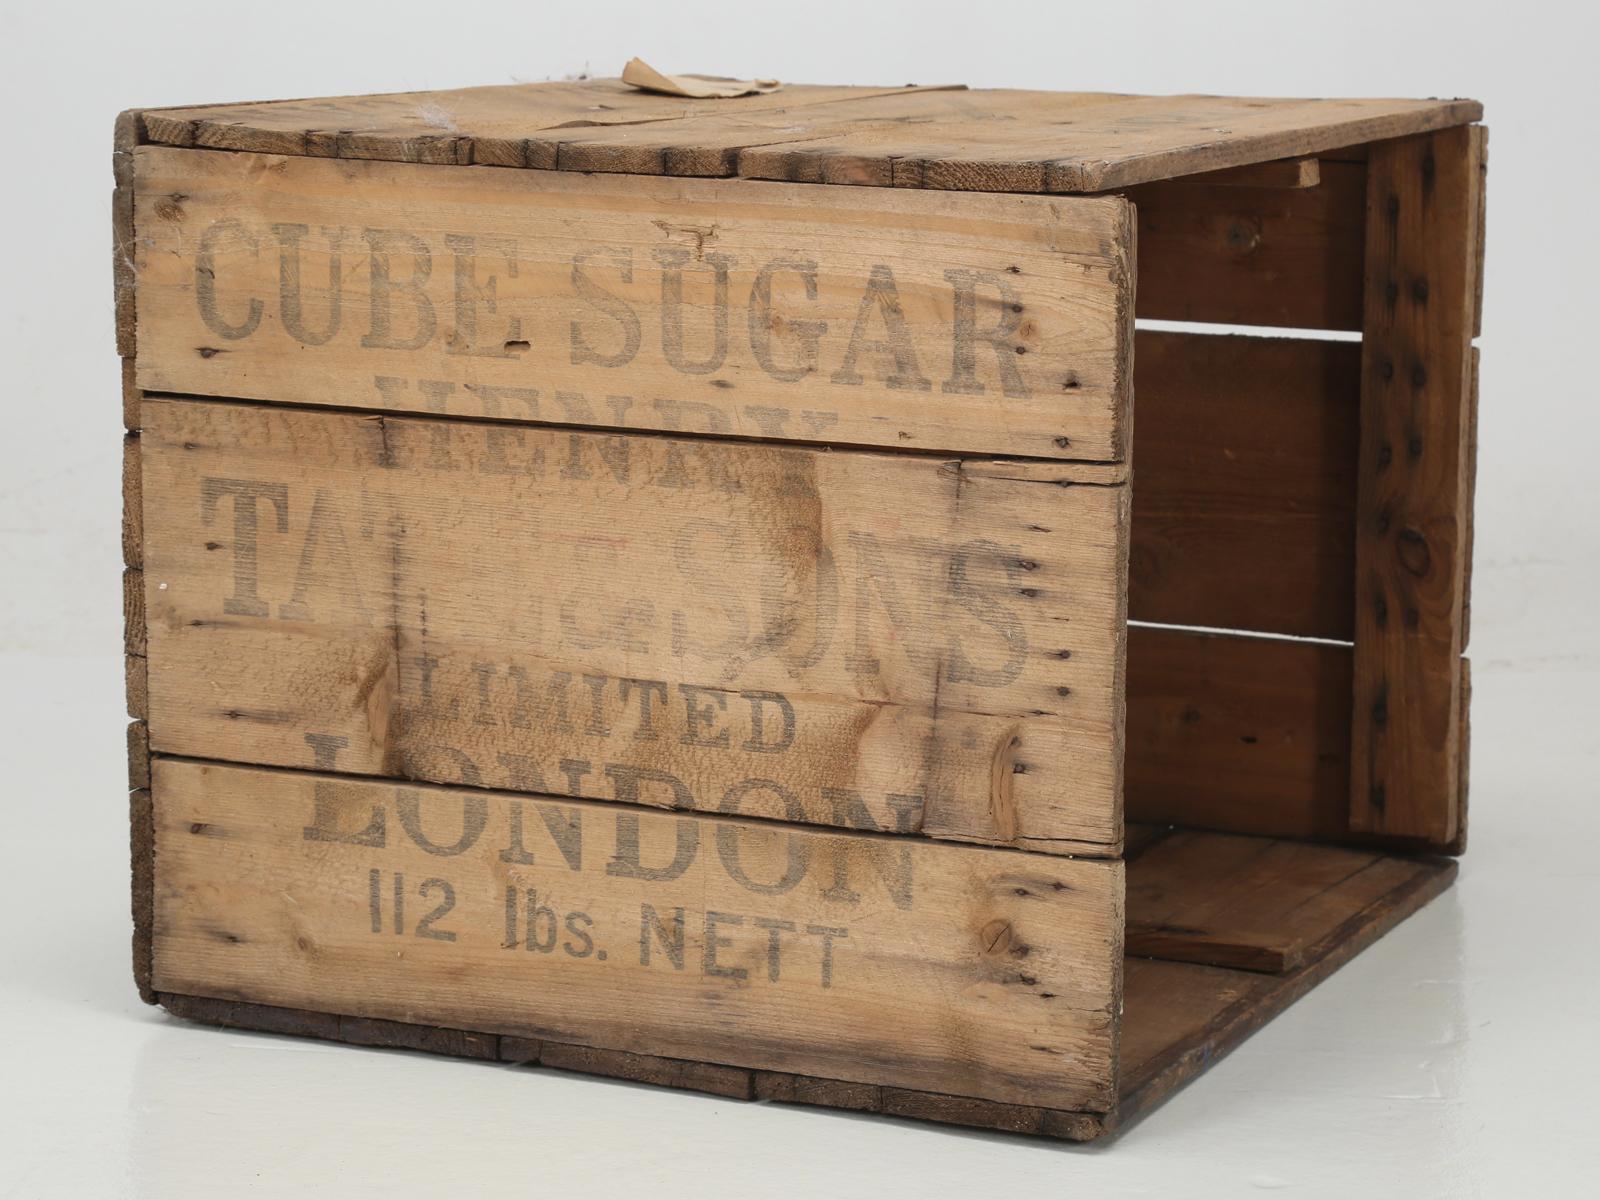 Late 19th Century Henry Tate & Sons Sugar Cube Crate, circa 1900